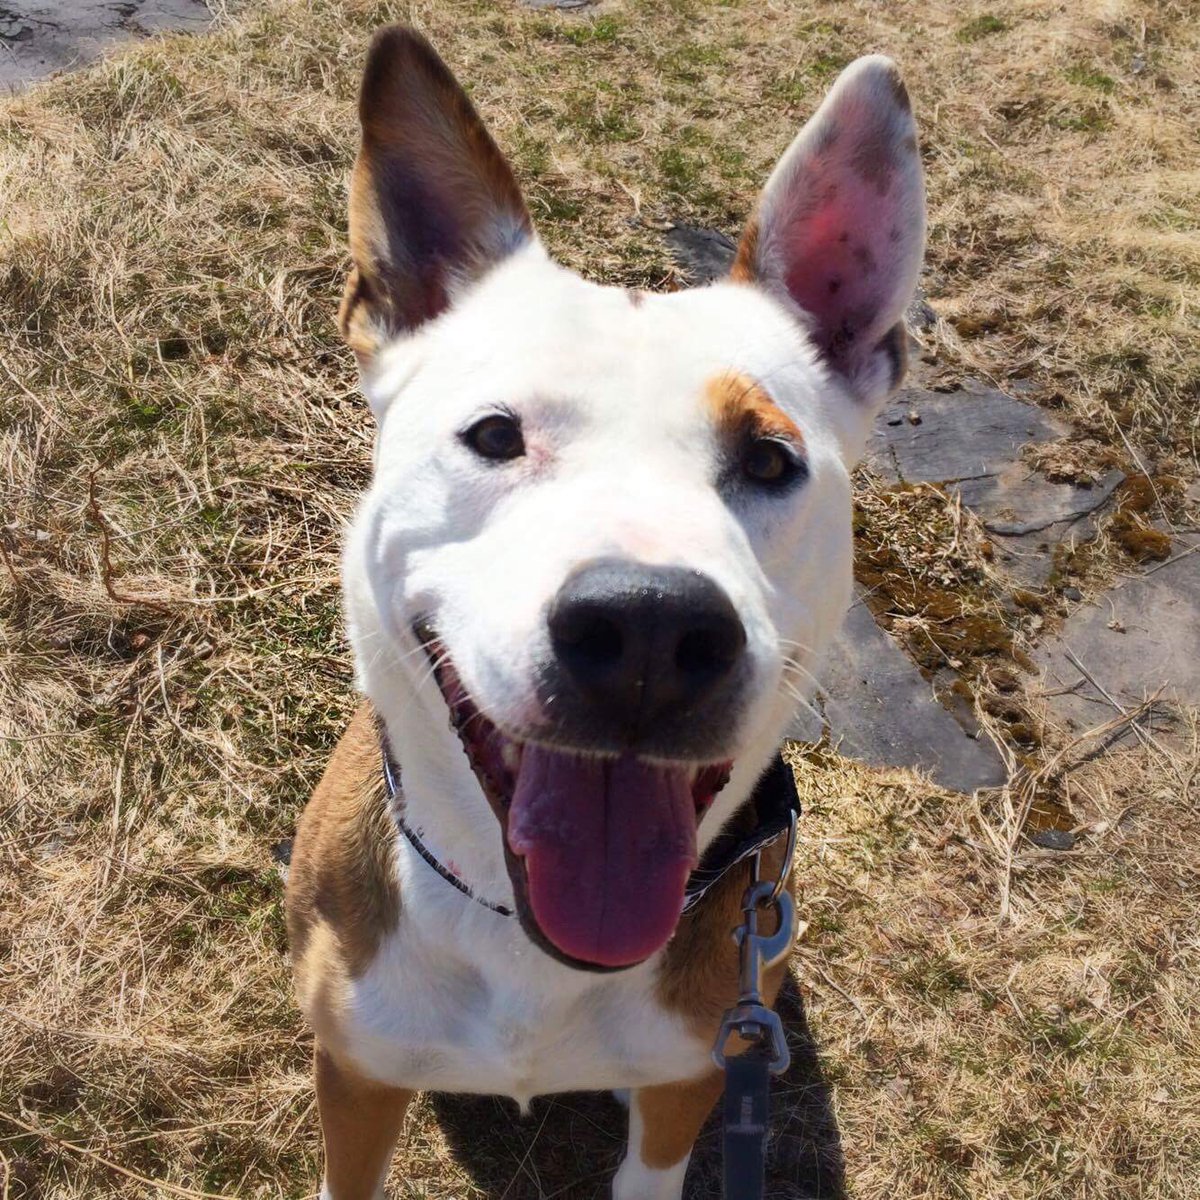 Rupert is all full of smiles! It would make him even happier to find his forever home. Come meet his busy boy! 🐾